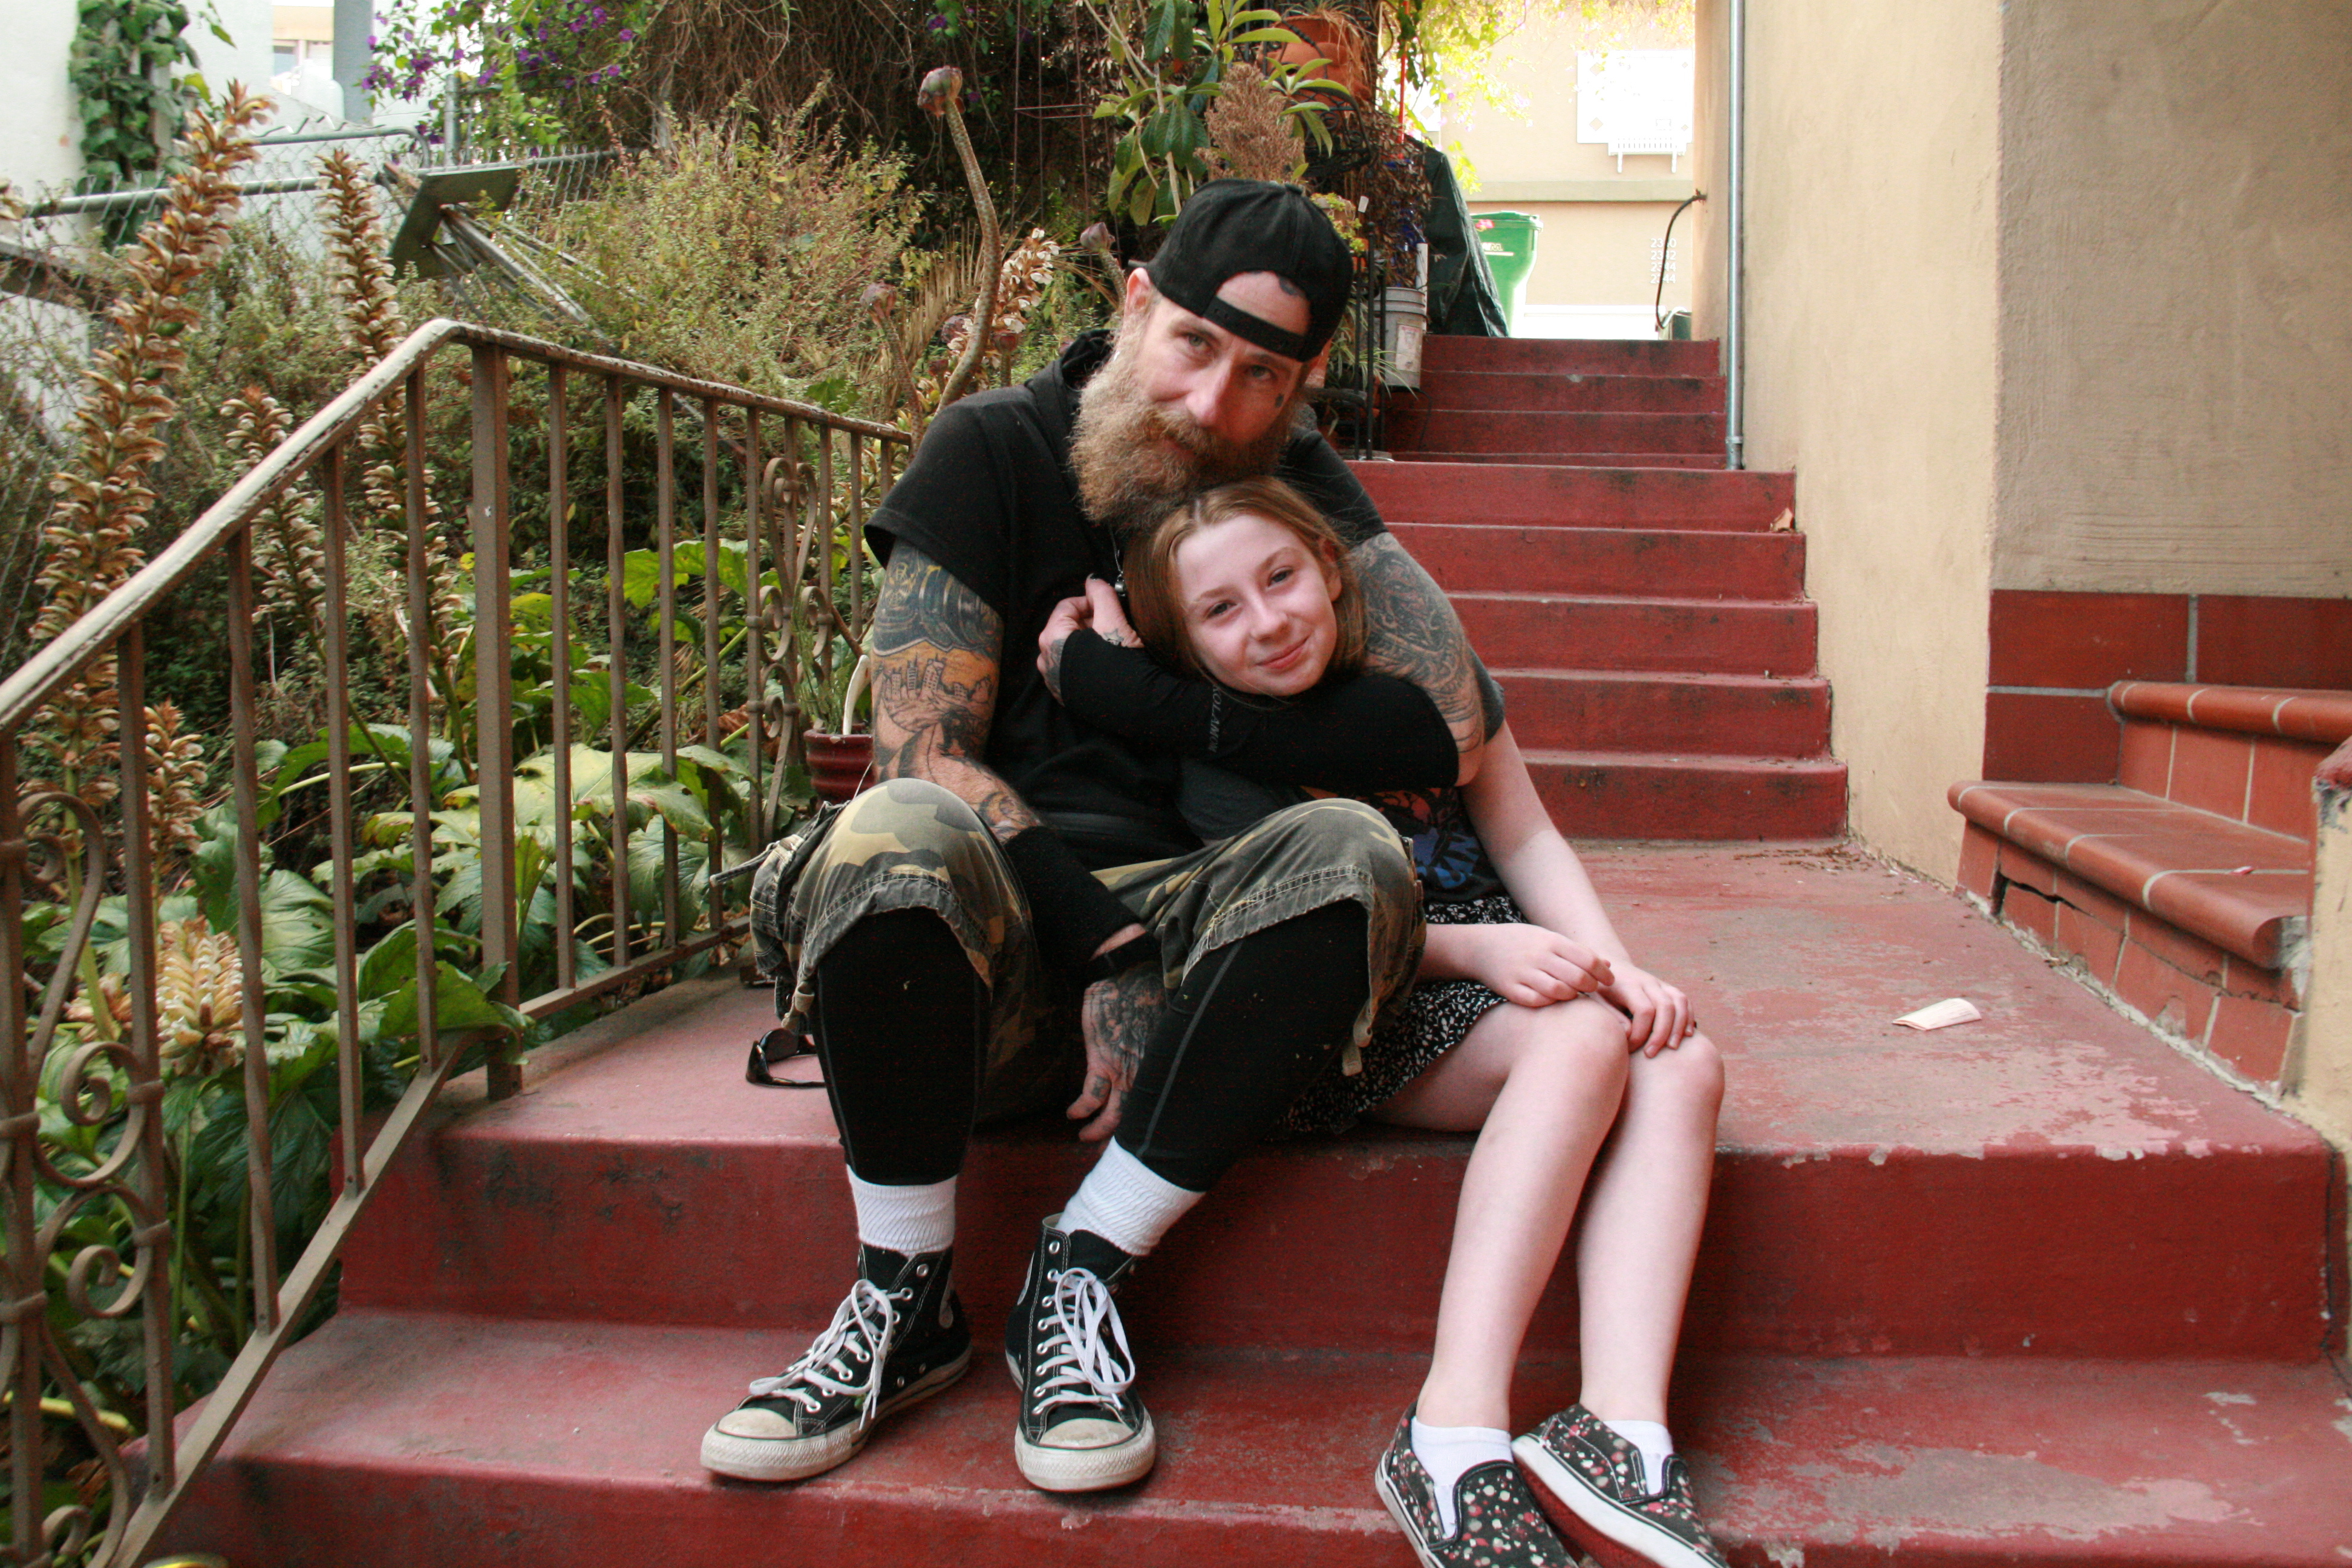 A smiling child (Jett) being hugged by her dad, sitting on some stairs.